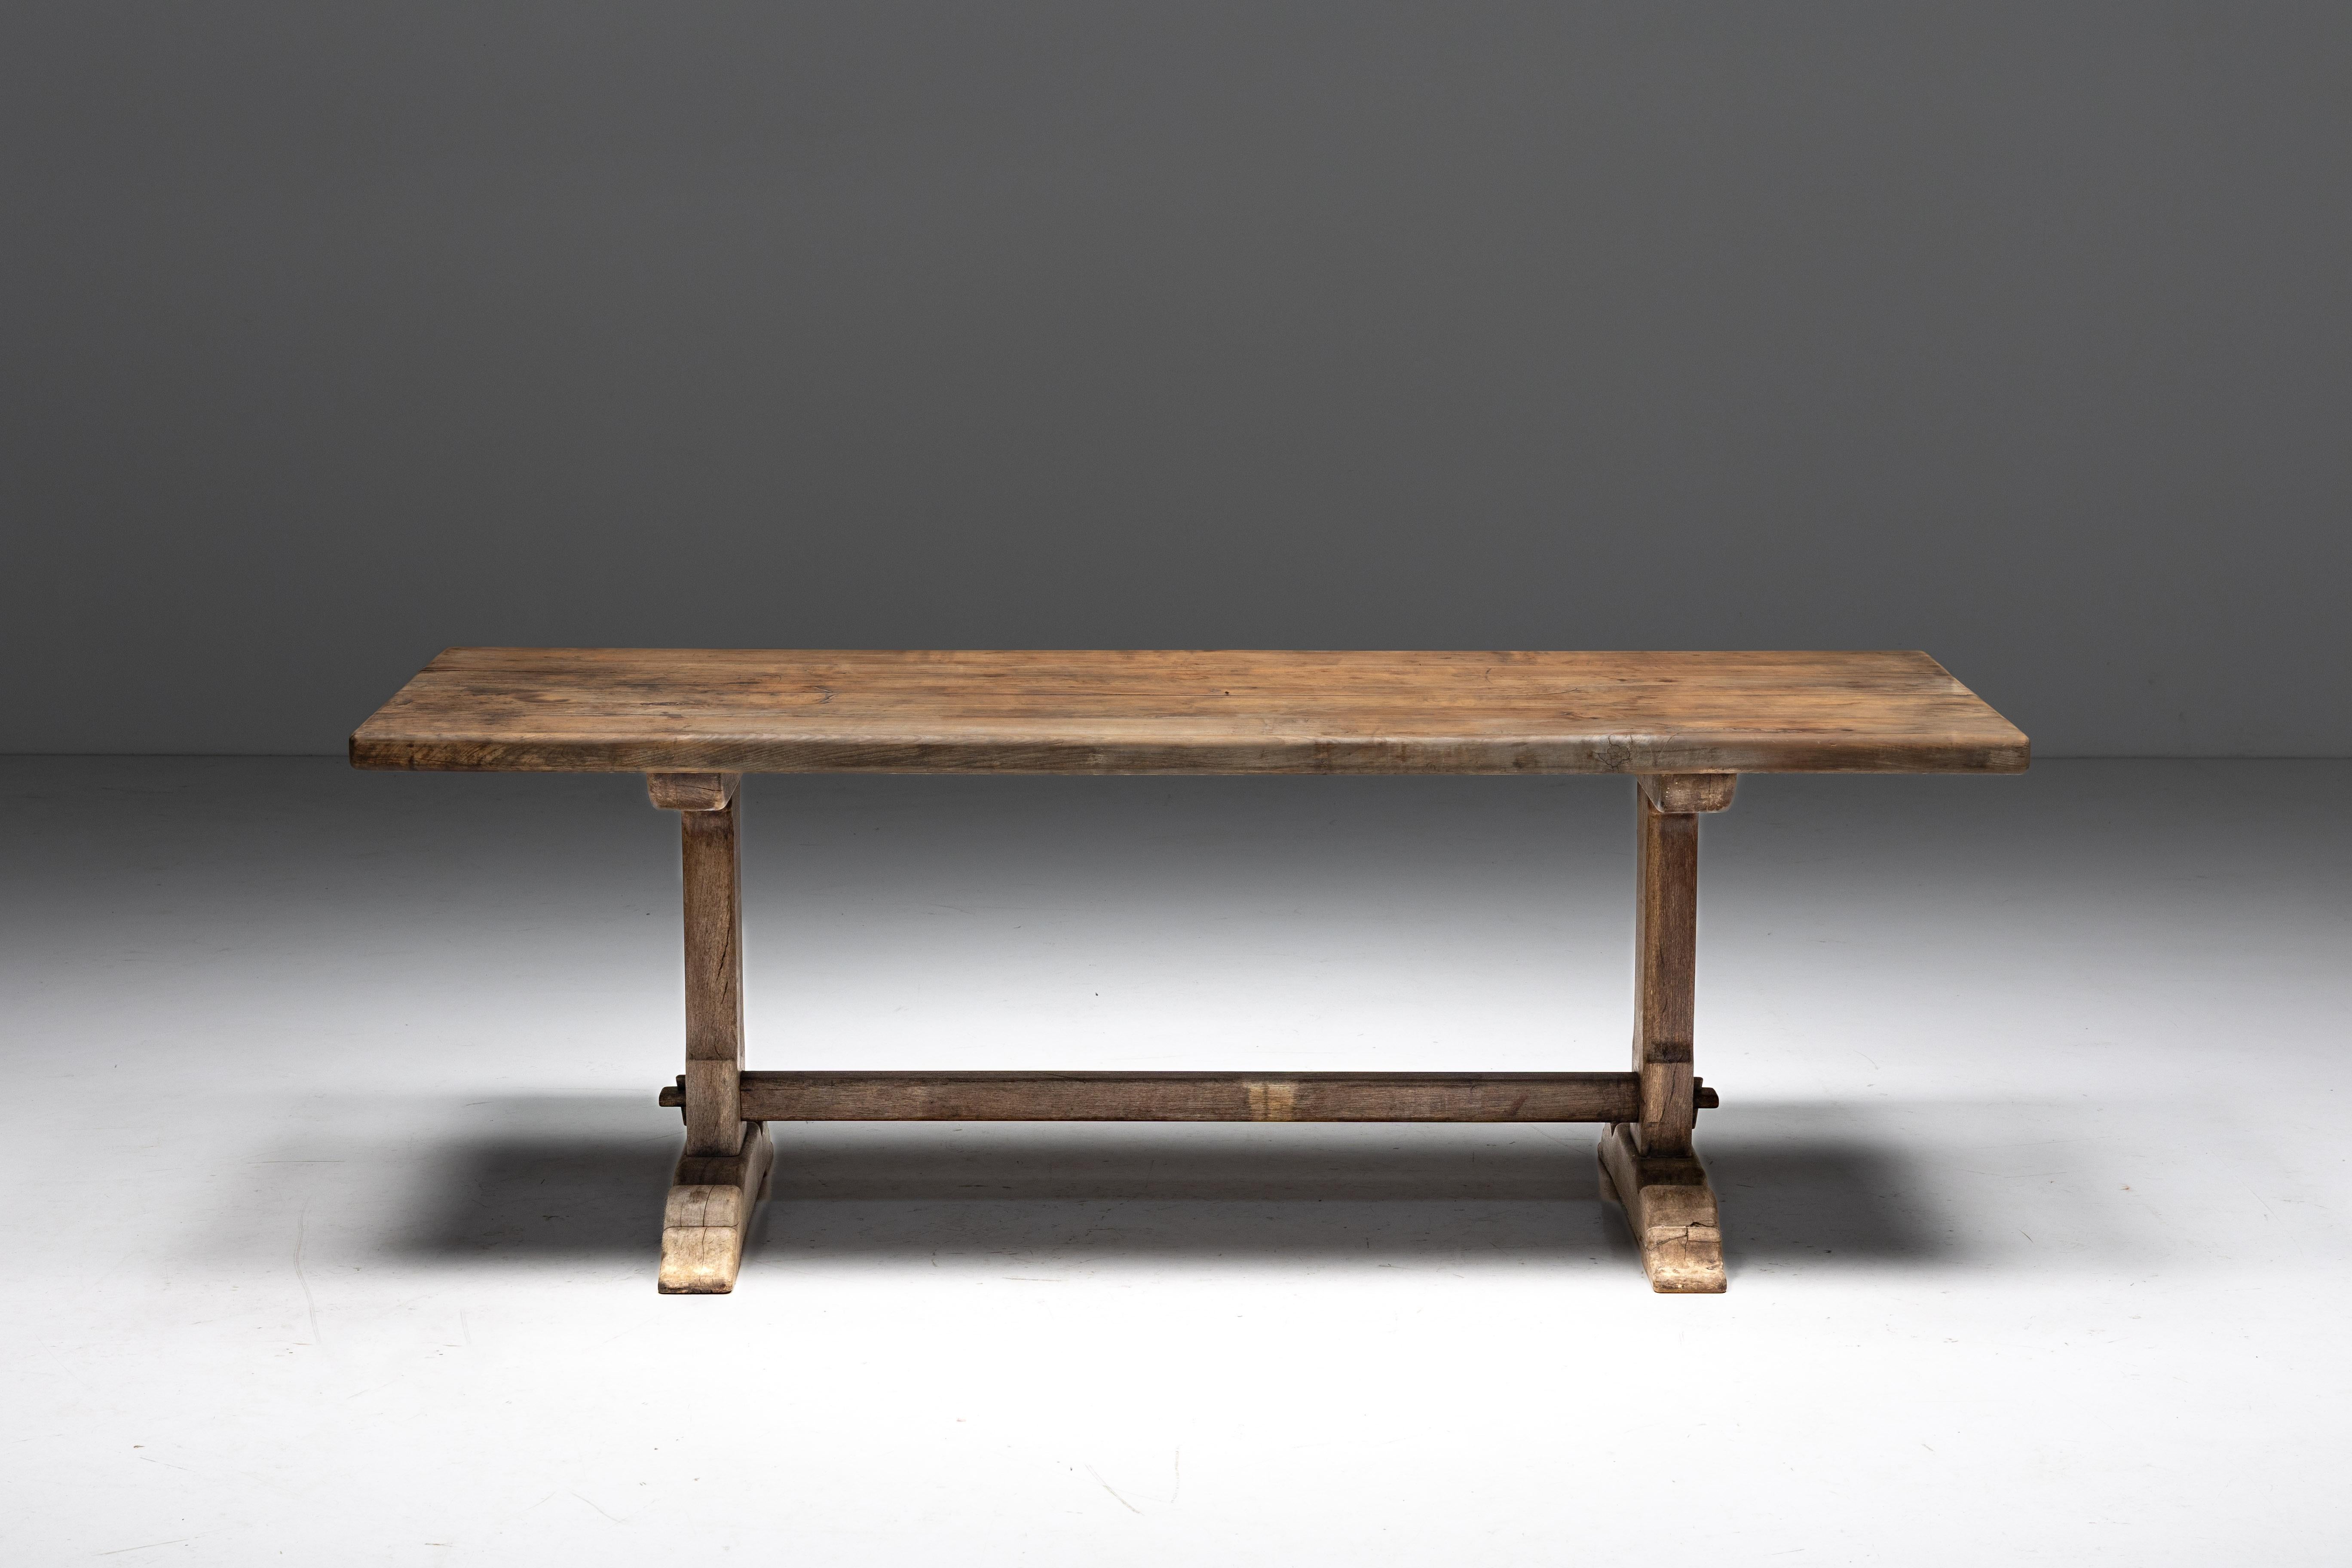 Rustic; Art Populaire; Dining Table; 19th Century; France; Folk Art; Wabi Sabi; Robust; Brutalist Design; Arts & Crafts;

Rustic dining table, originating from the 19th century, showcasing a thick tabletop, meticulously crafted from robust oak wood.